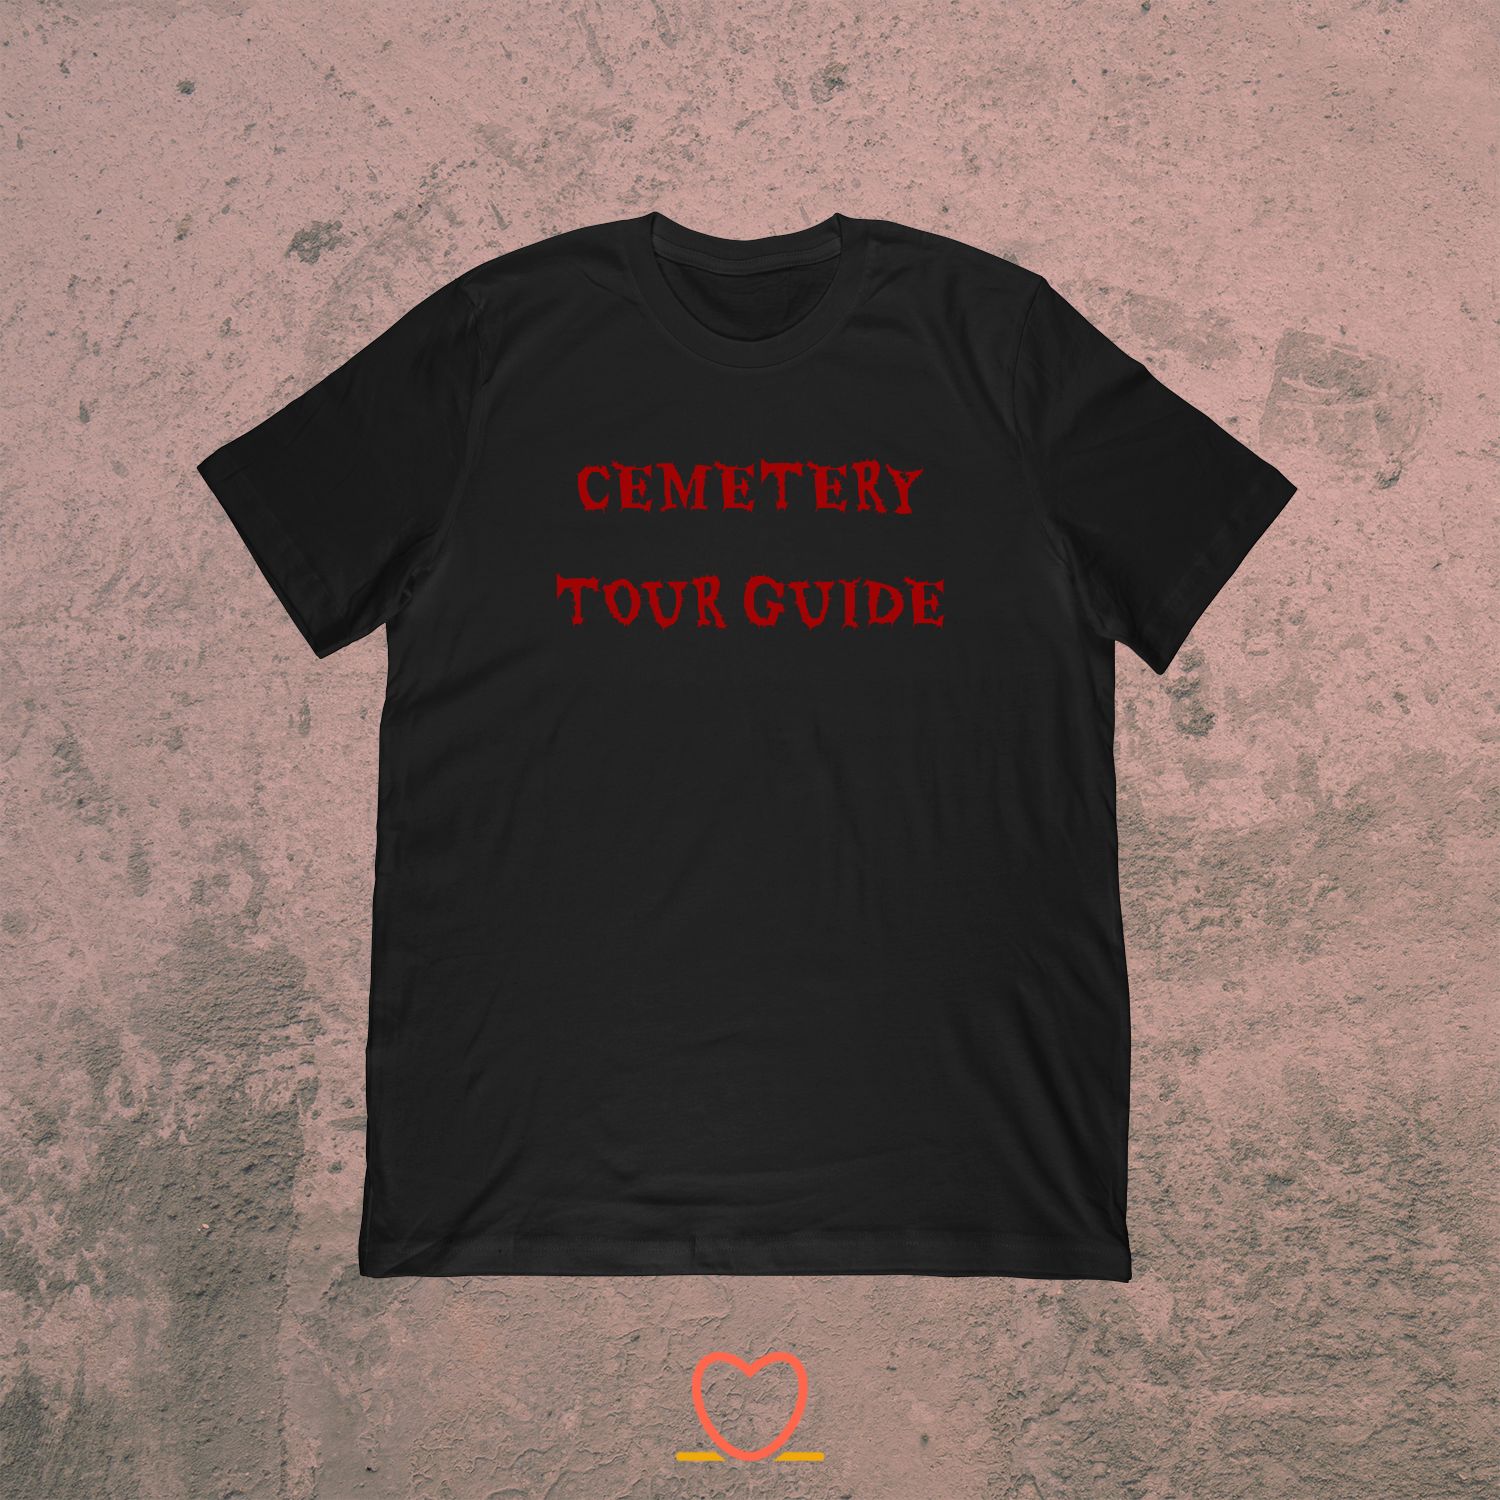 Cemetery Tour Guide – Funny Horror & Cemetery Tee